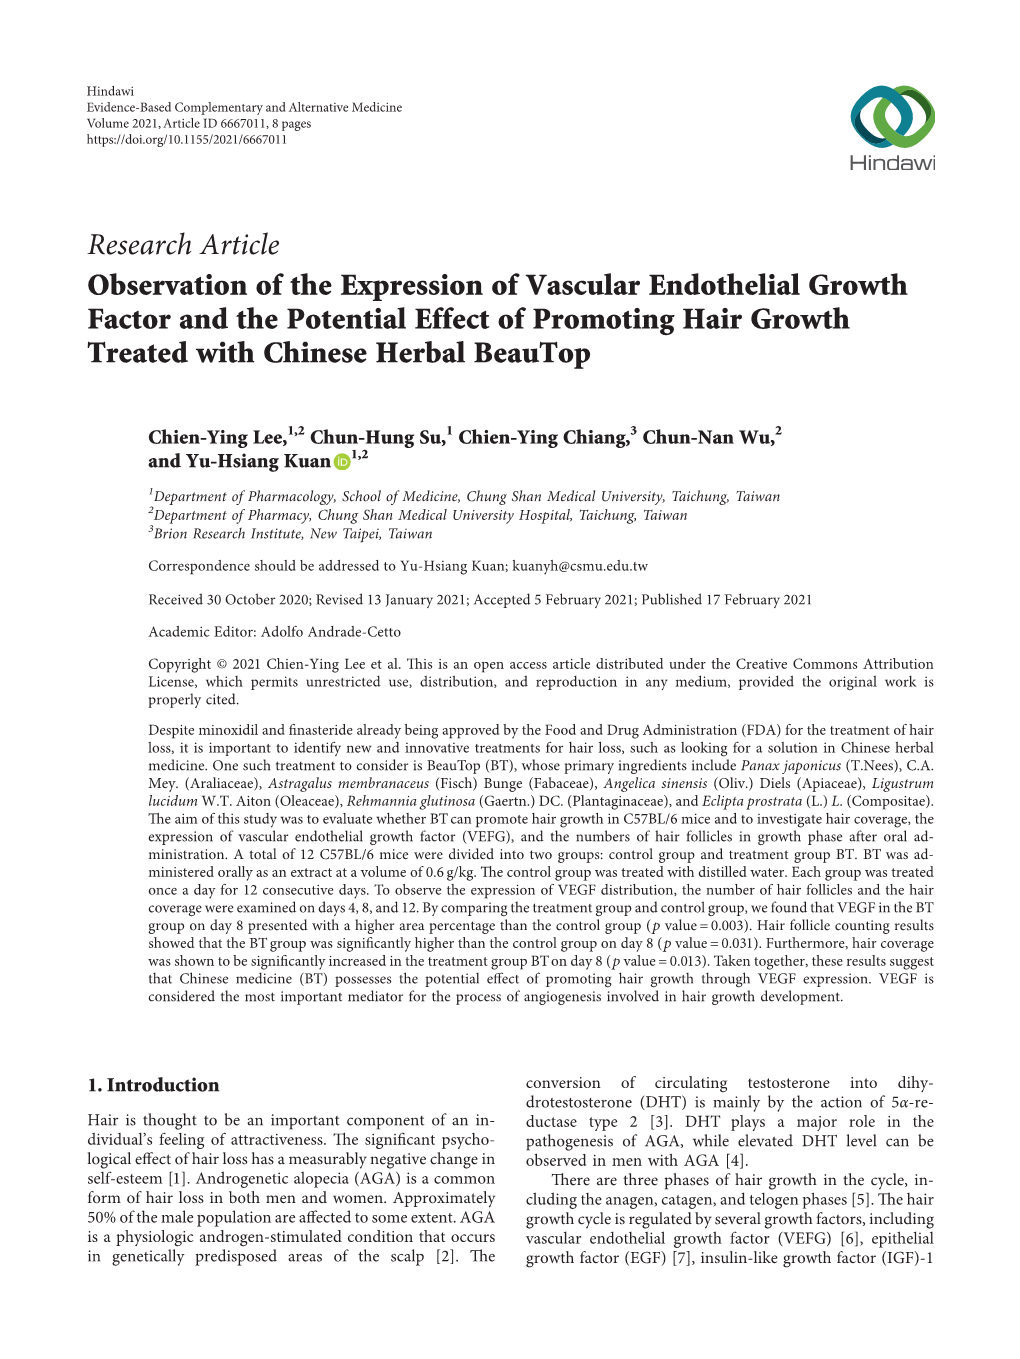 Observation of the Expression of Vascular Endothelial Growth Factor and the Potential Effect of Promoting Hair Growth Treated with Chinese Herbal Beautop